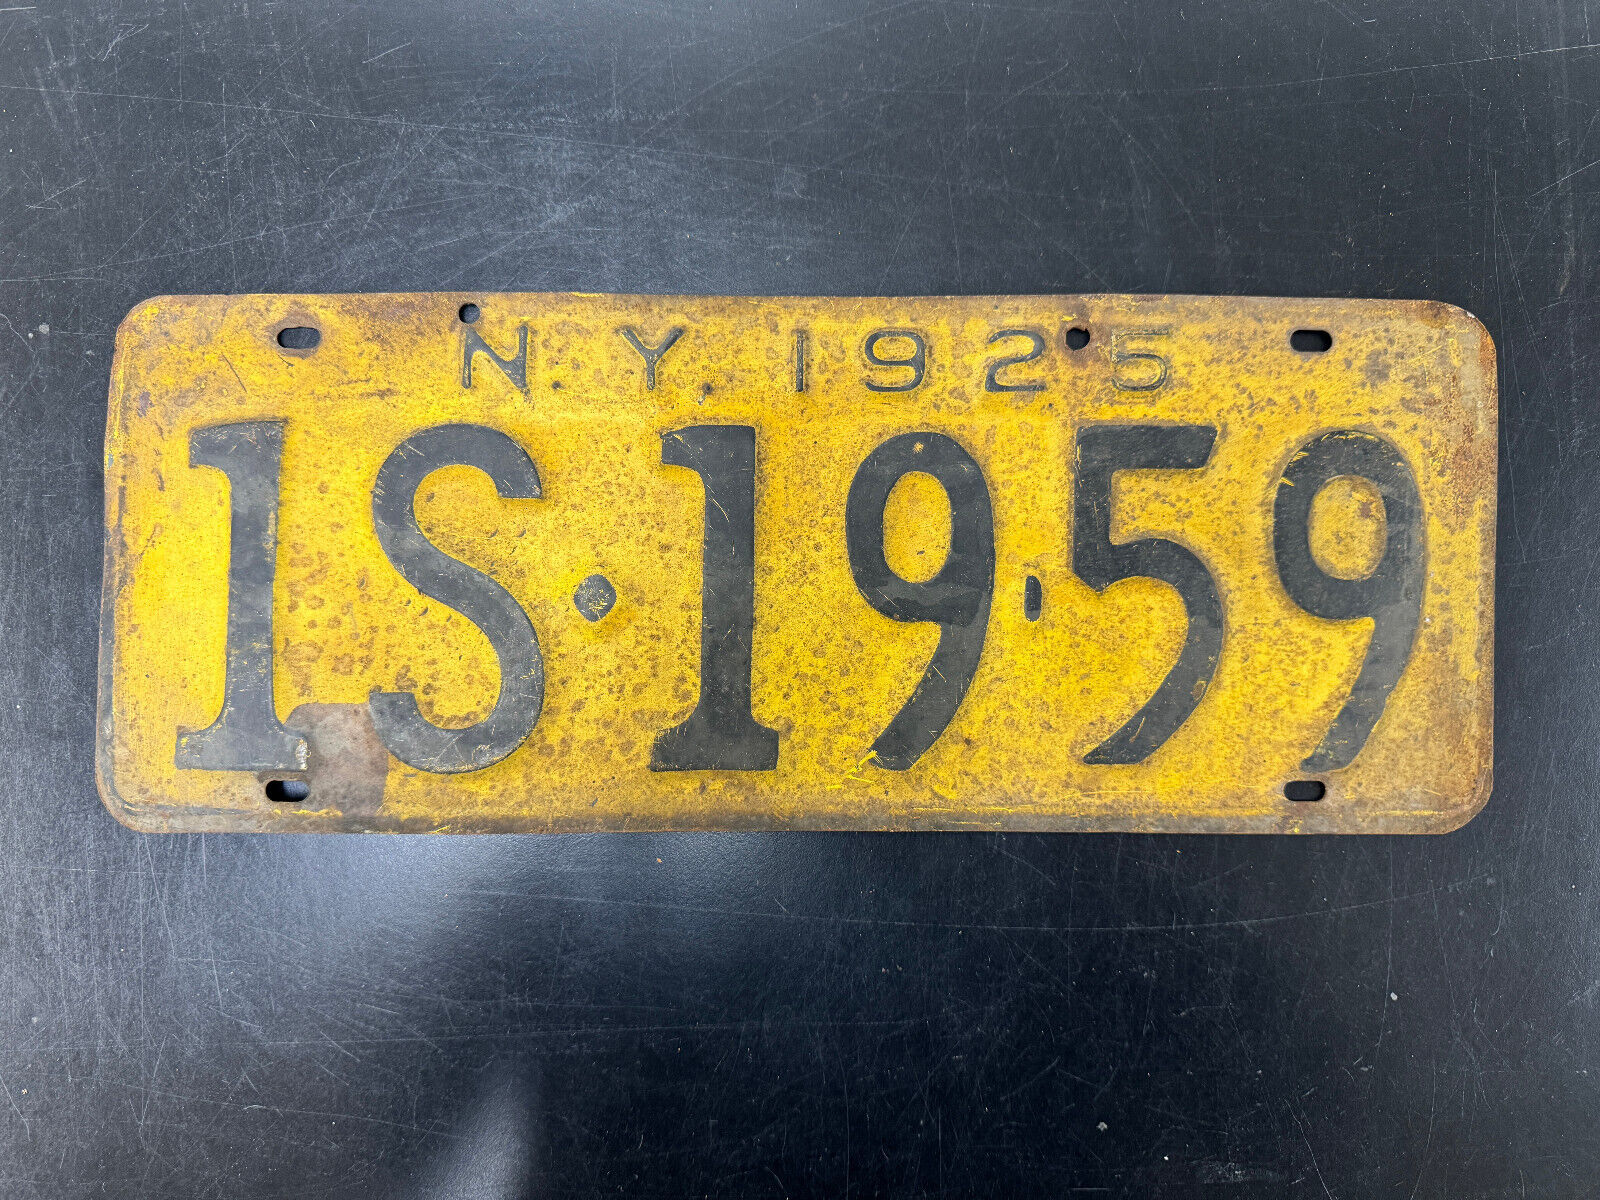 1925 New York State License Plate “1S 19 59”